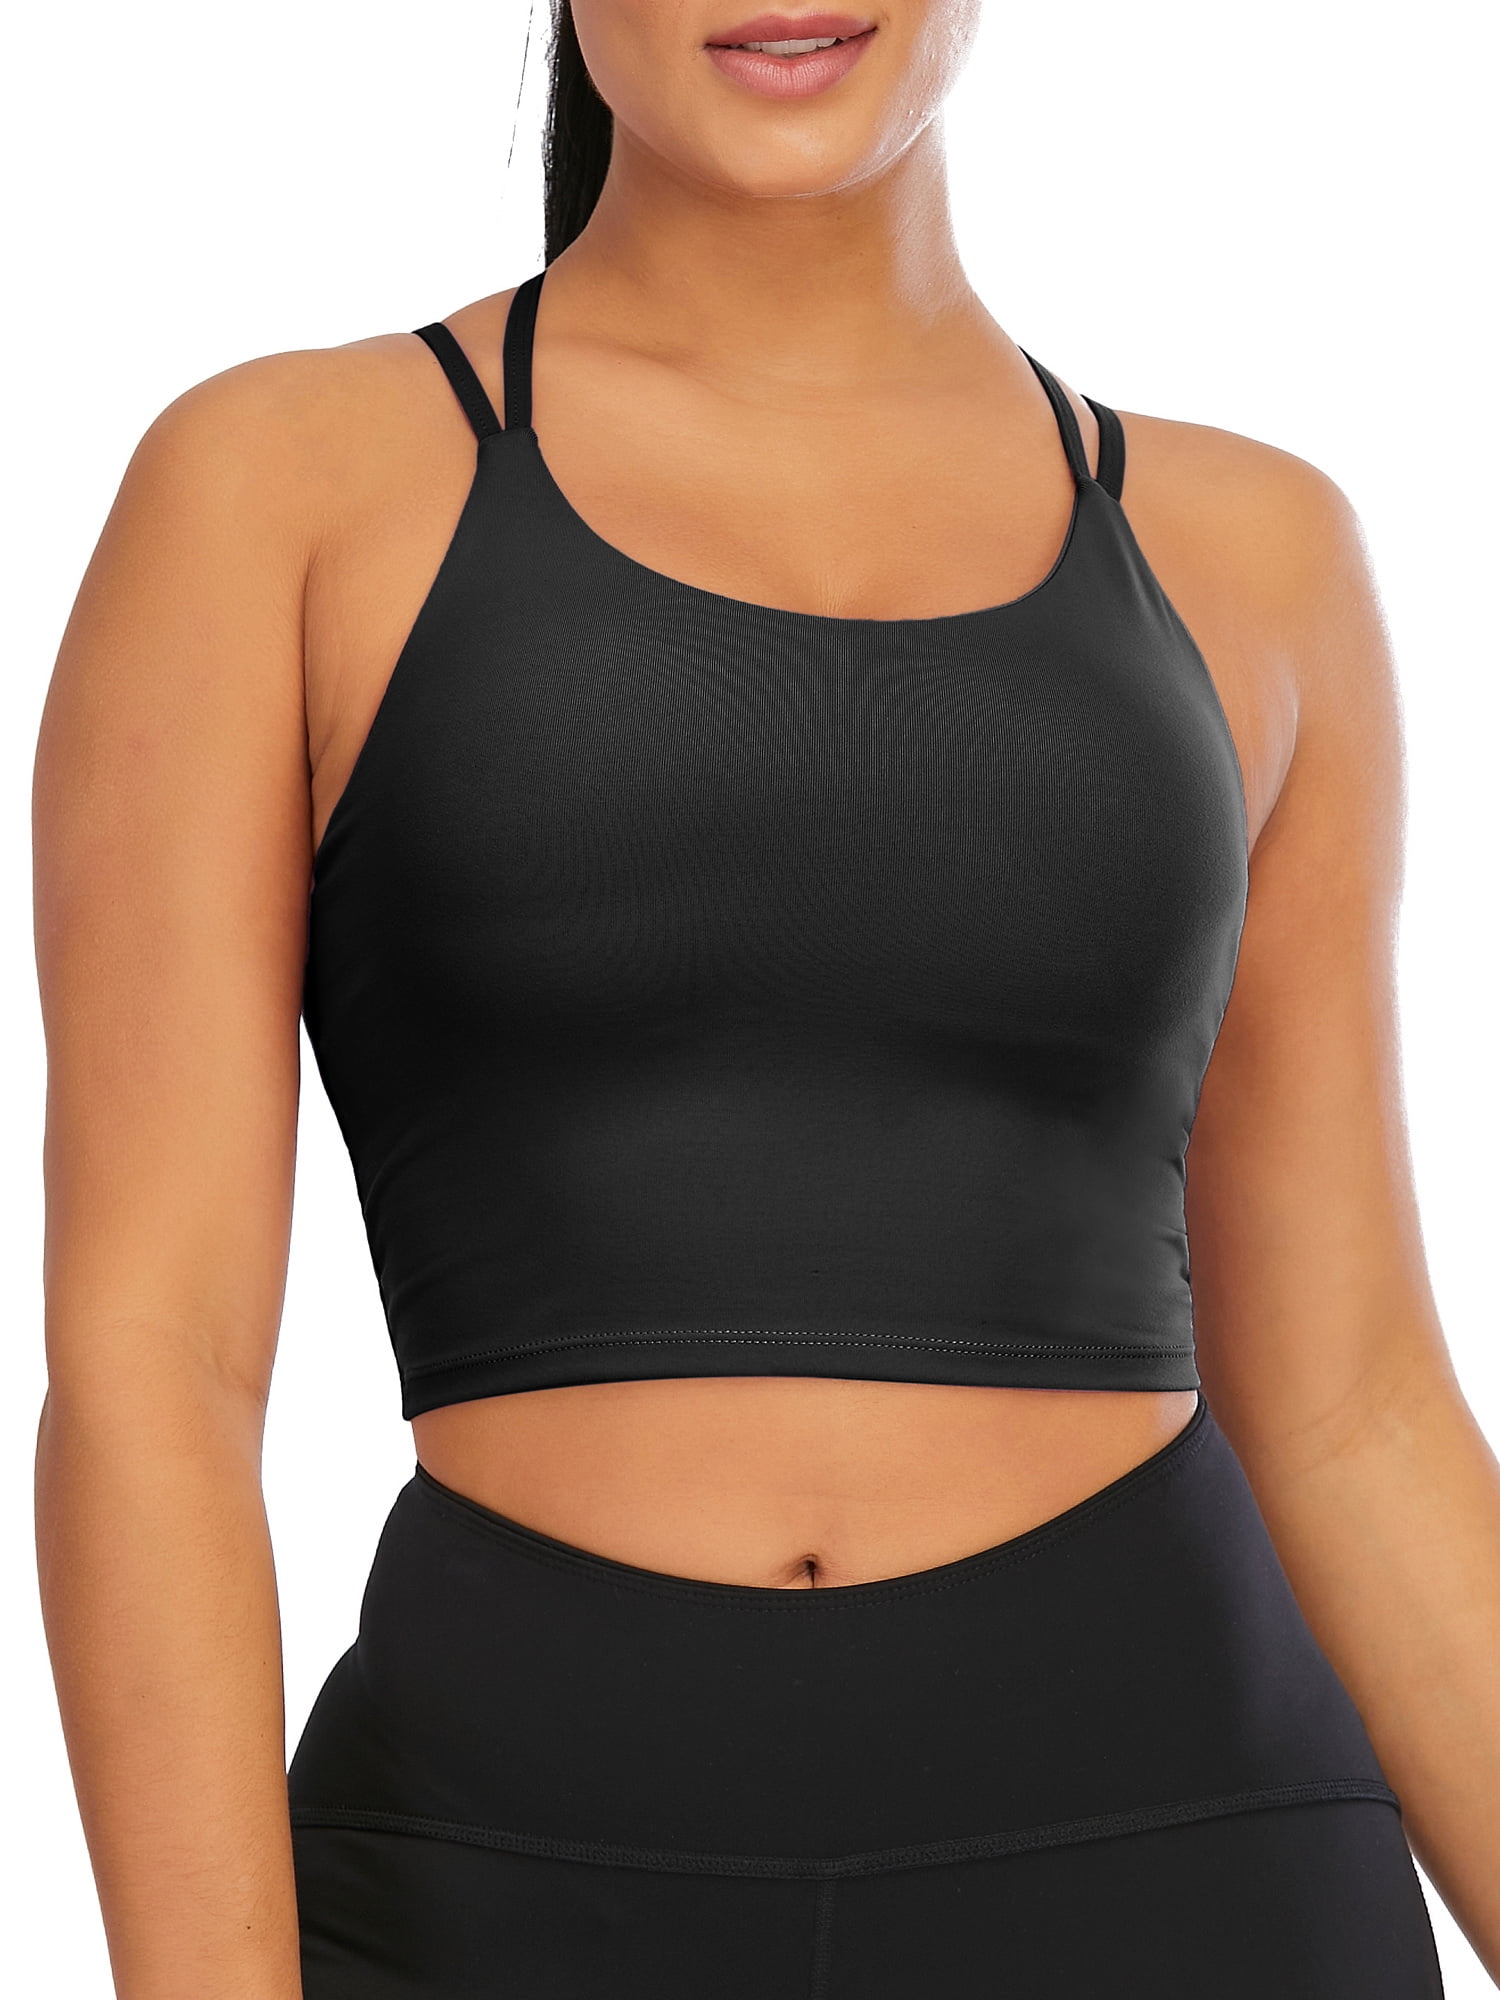 LELINTA Women Crop Tops Sports Bras Mesh Longline Fitness Camisole Yoga  Workout Running Gym Pad Shirt with Removable Cups 